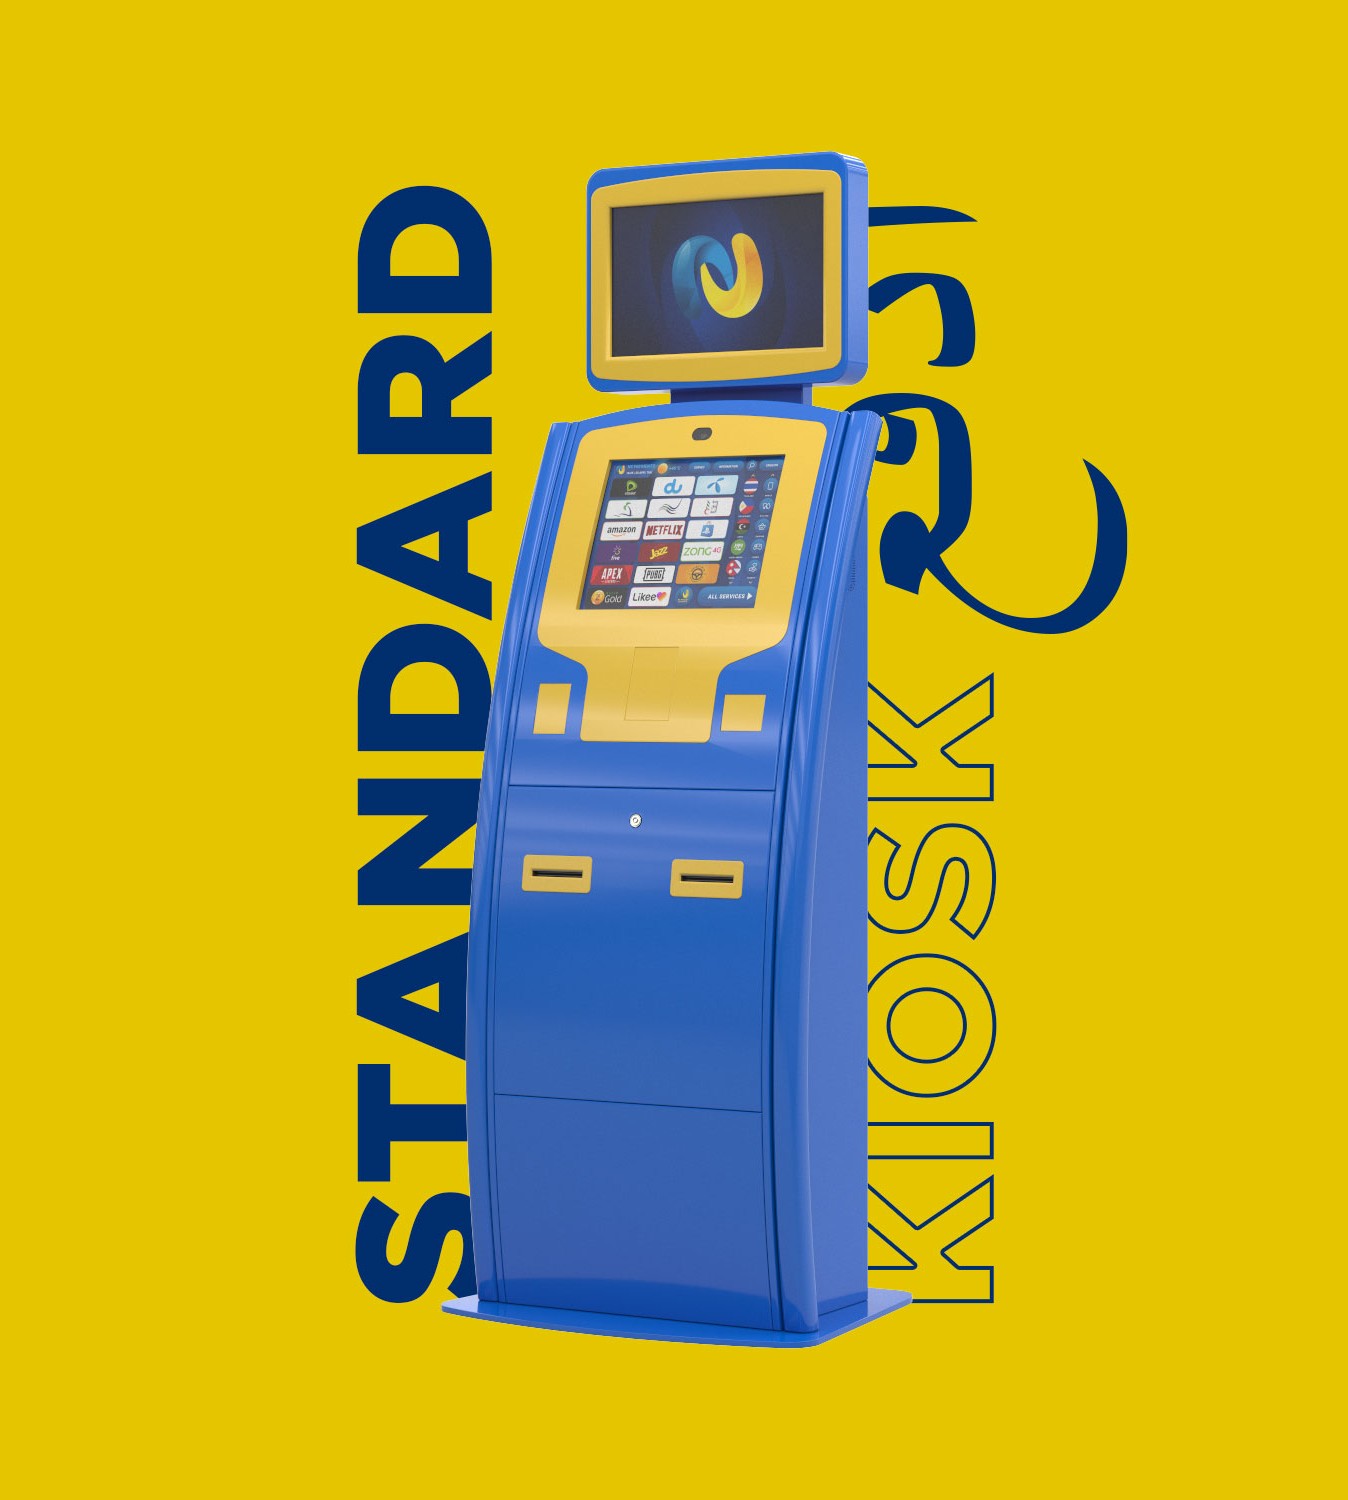 Standard-Kiosk - a self-service terminal is installed in places with a large flow of people. With an intuitive interface, bright colors and a user-friendly menu, it is likely to attract the attention of a wide audience of users.